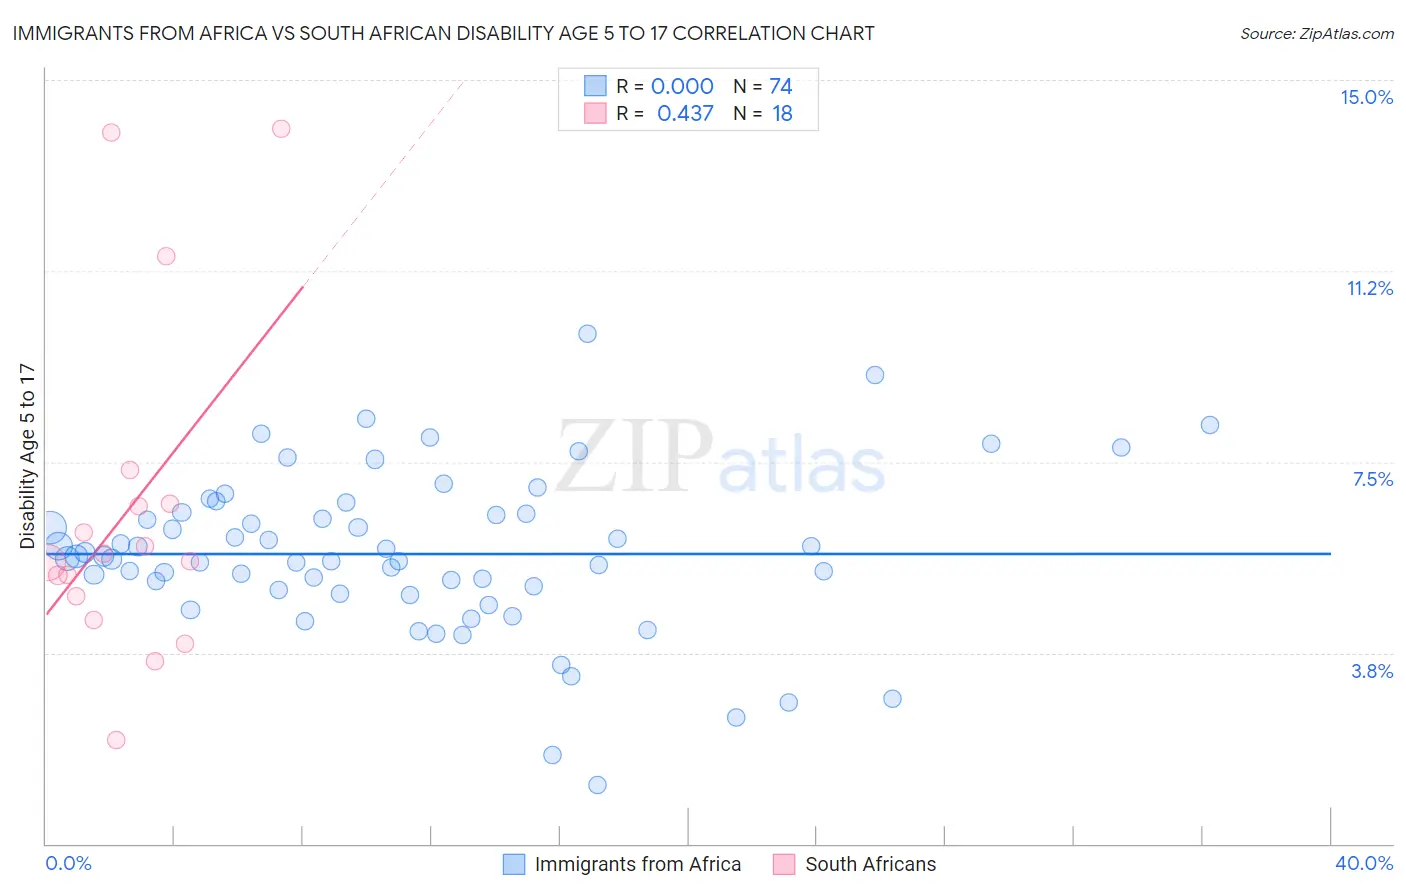 Immigrants from Africa vs South African Disability Age 5 to 17